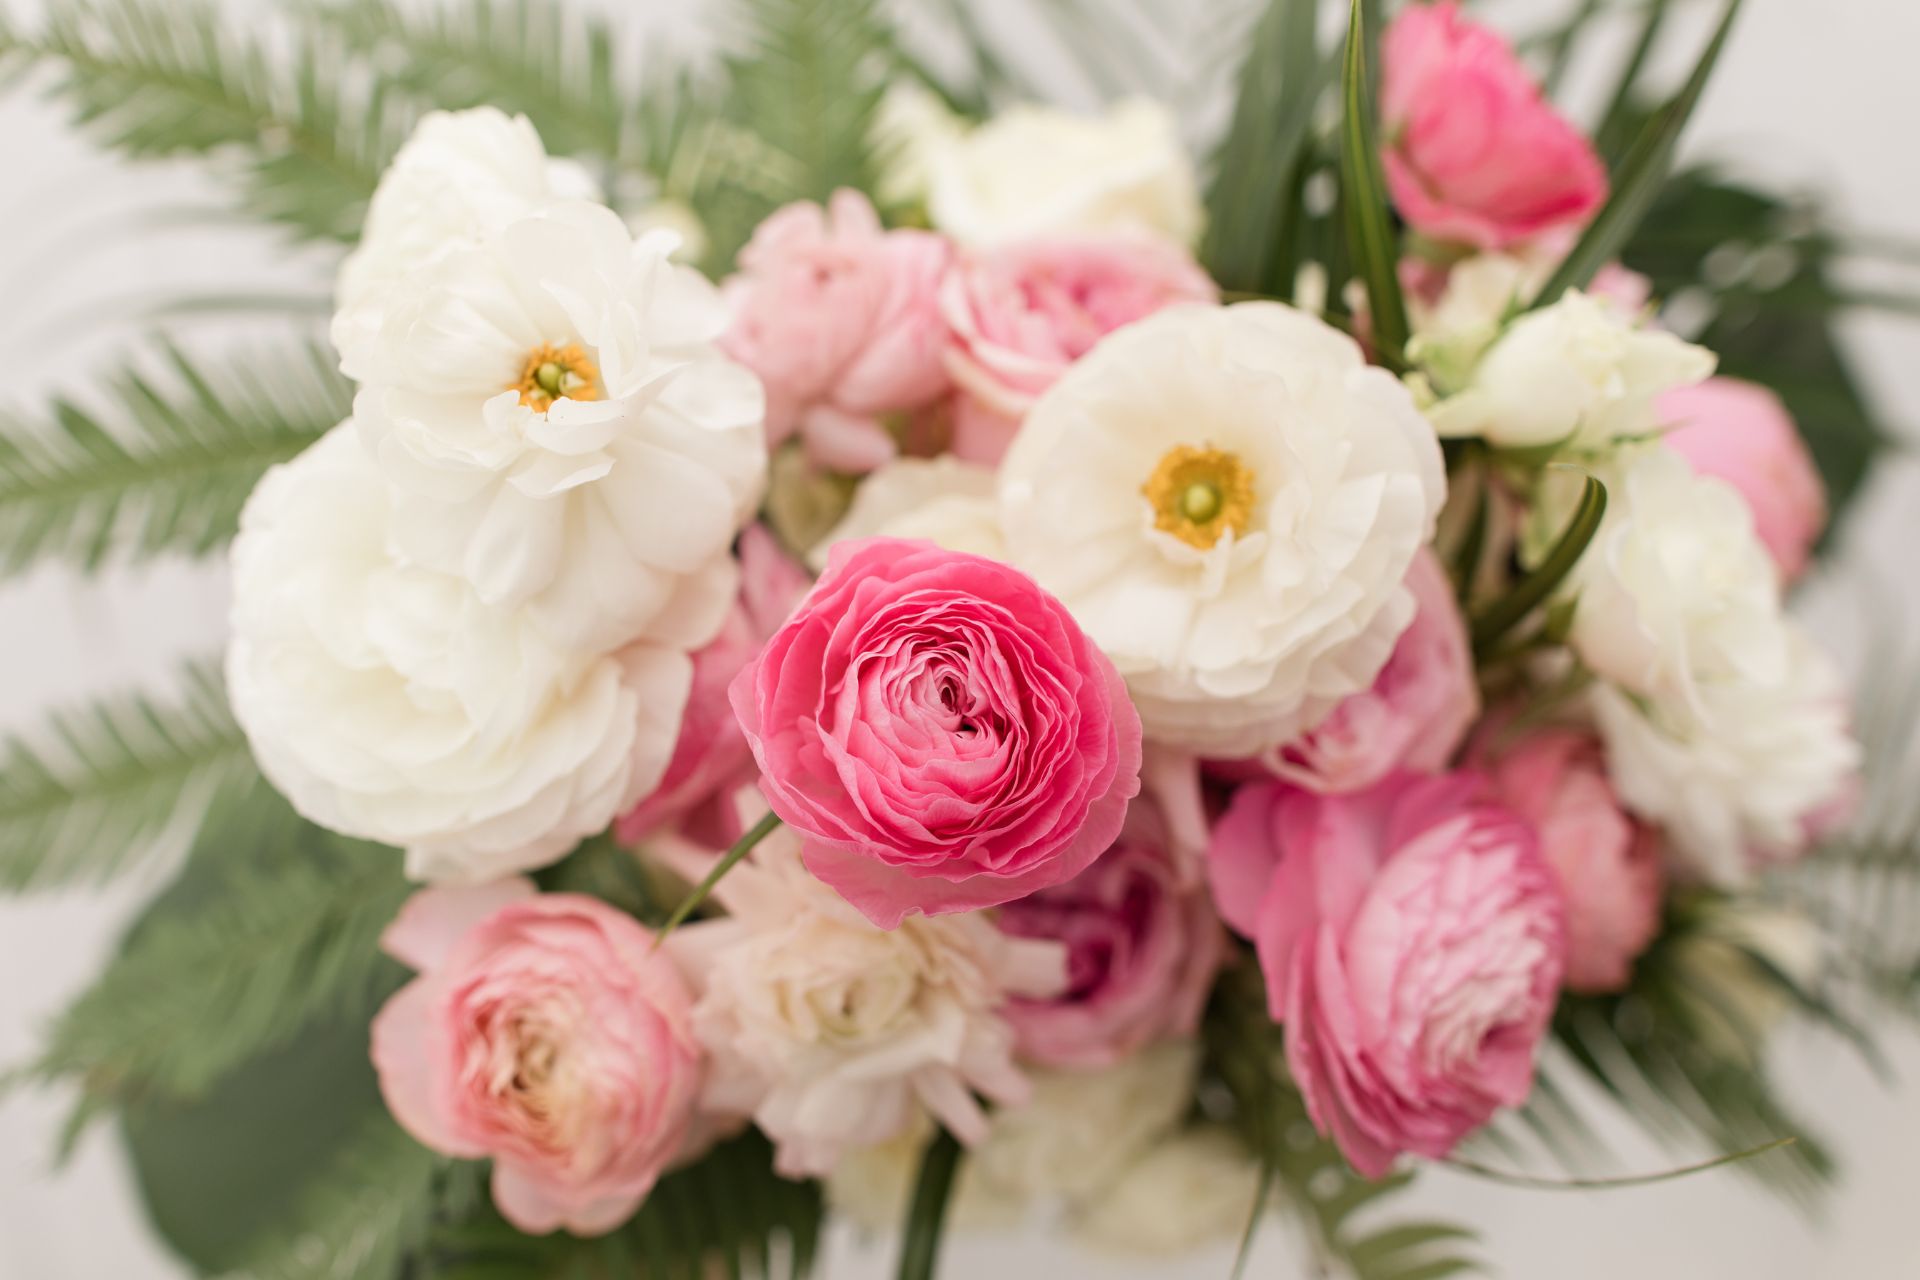 Top 3 Flowers For Every Wedding Season & Choosing The Right Ones - A Guide by Moana Nursery blog image with woman carrying seasonal flower wedding bouquet